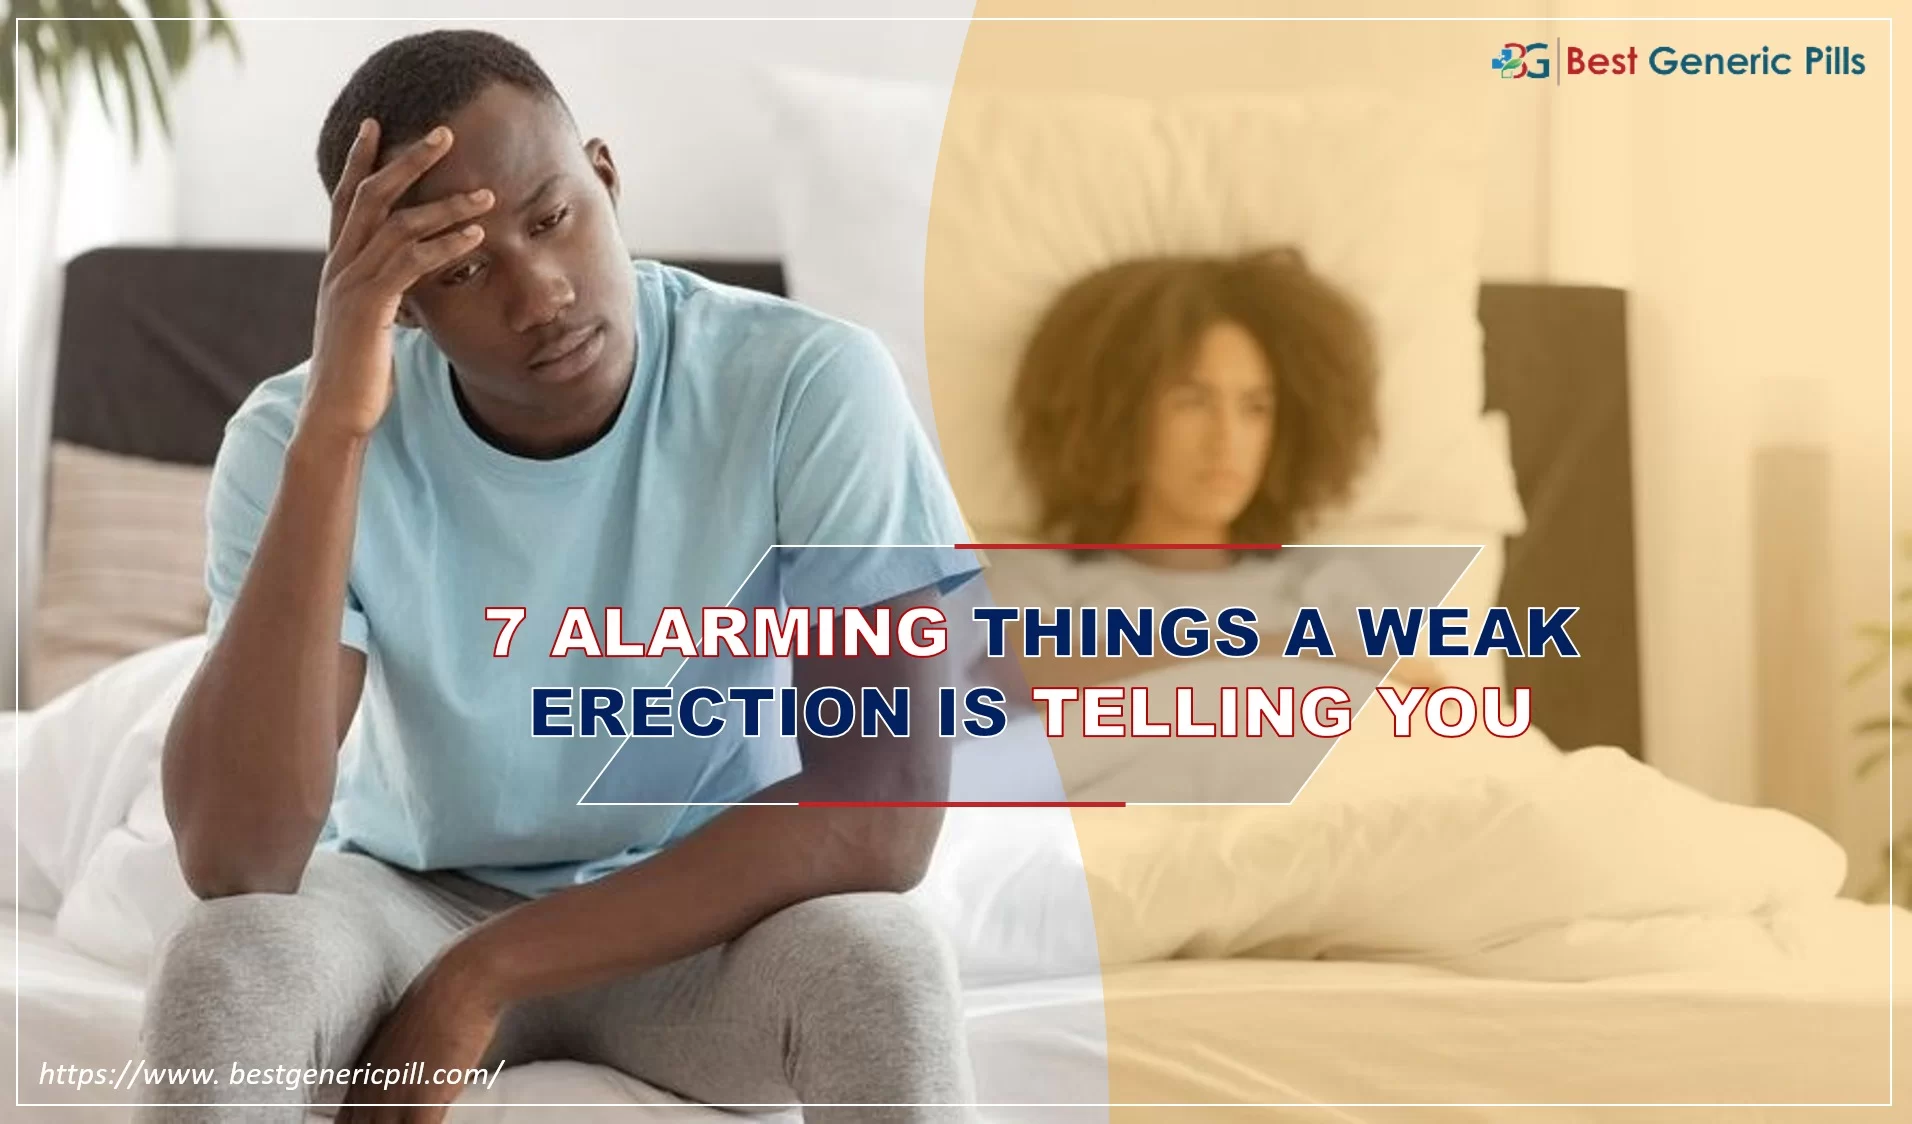 7 Alarming Things a Weak Erection is Telling You